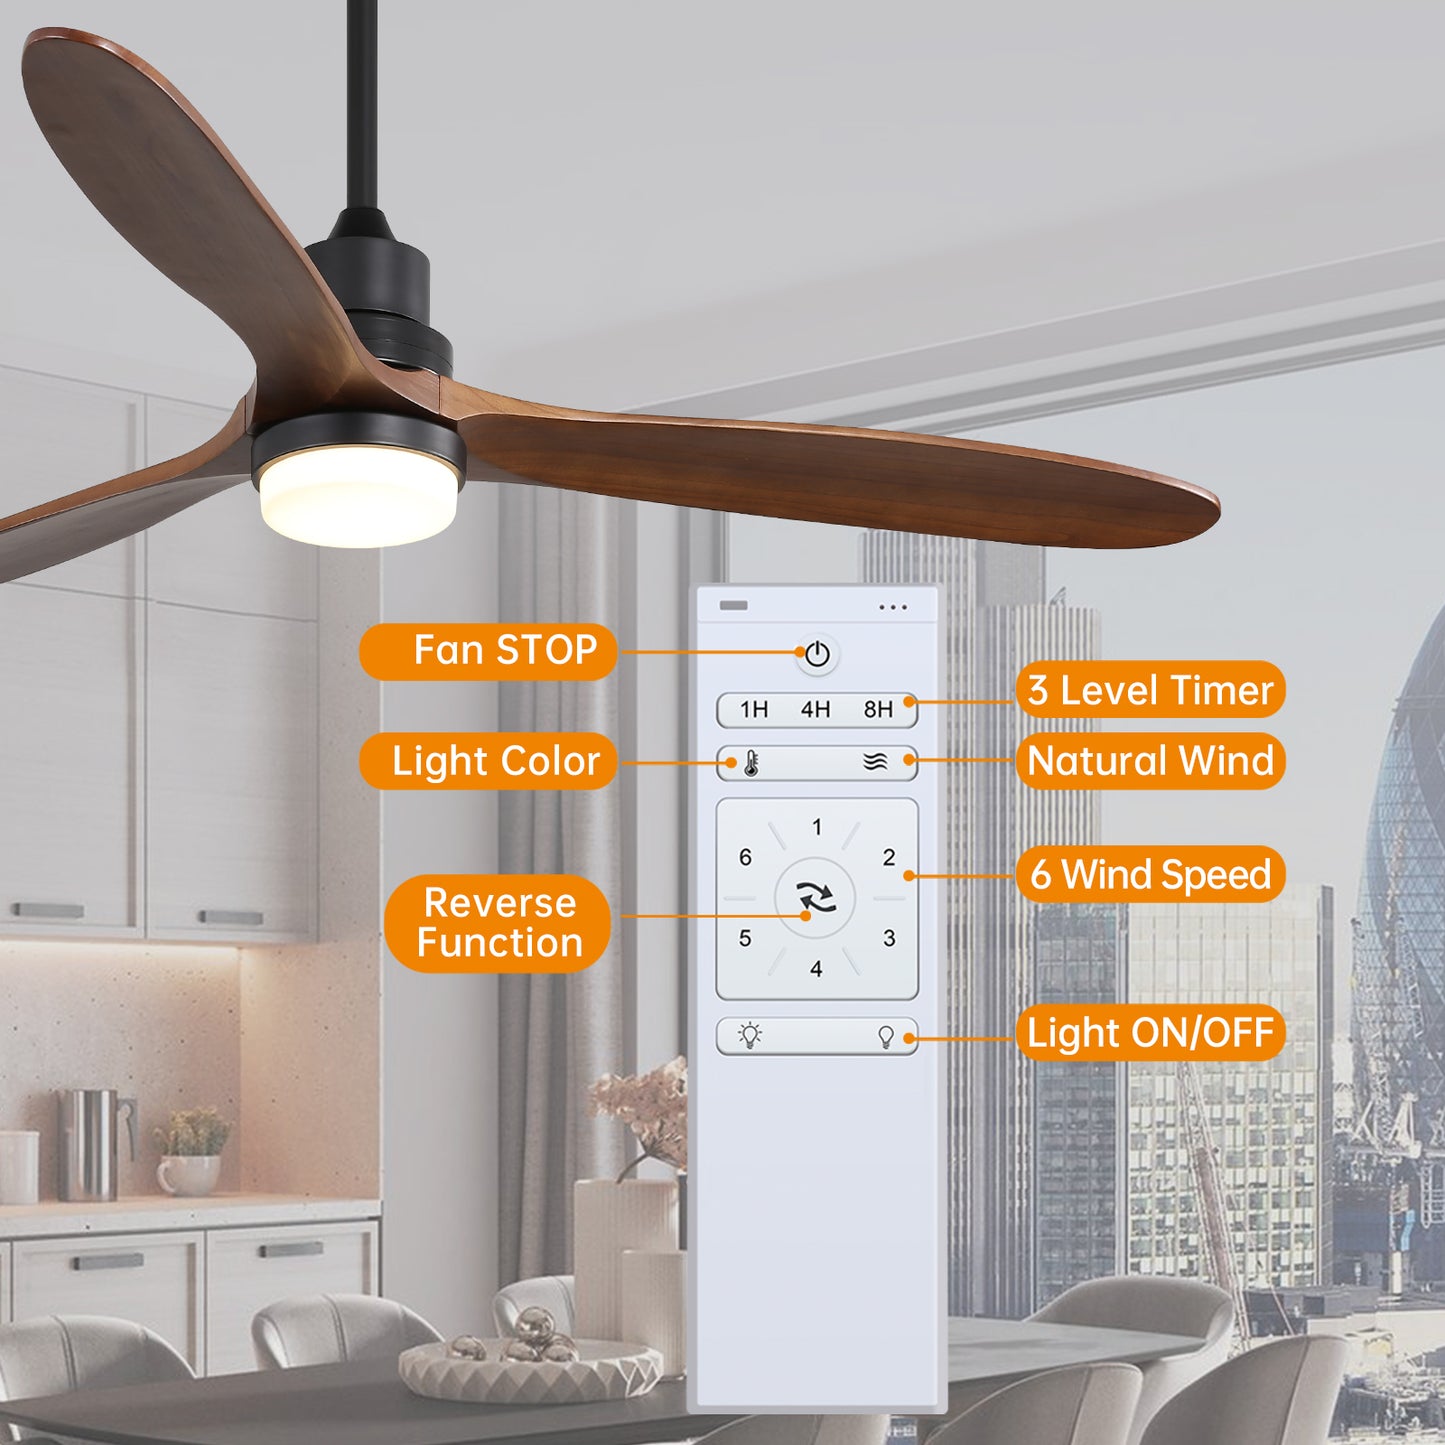 Modern Walnut 60-Inch Ceiling Fan with LED Lights and Remote Control